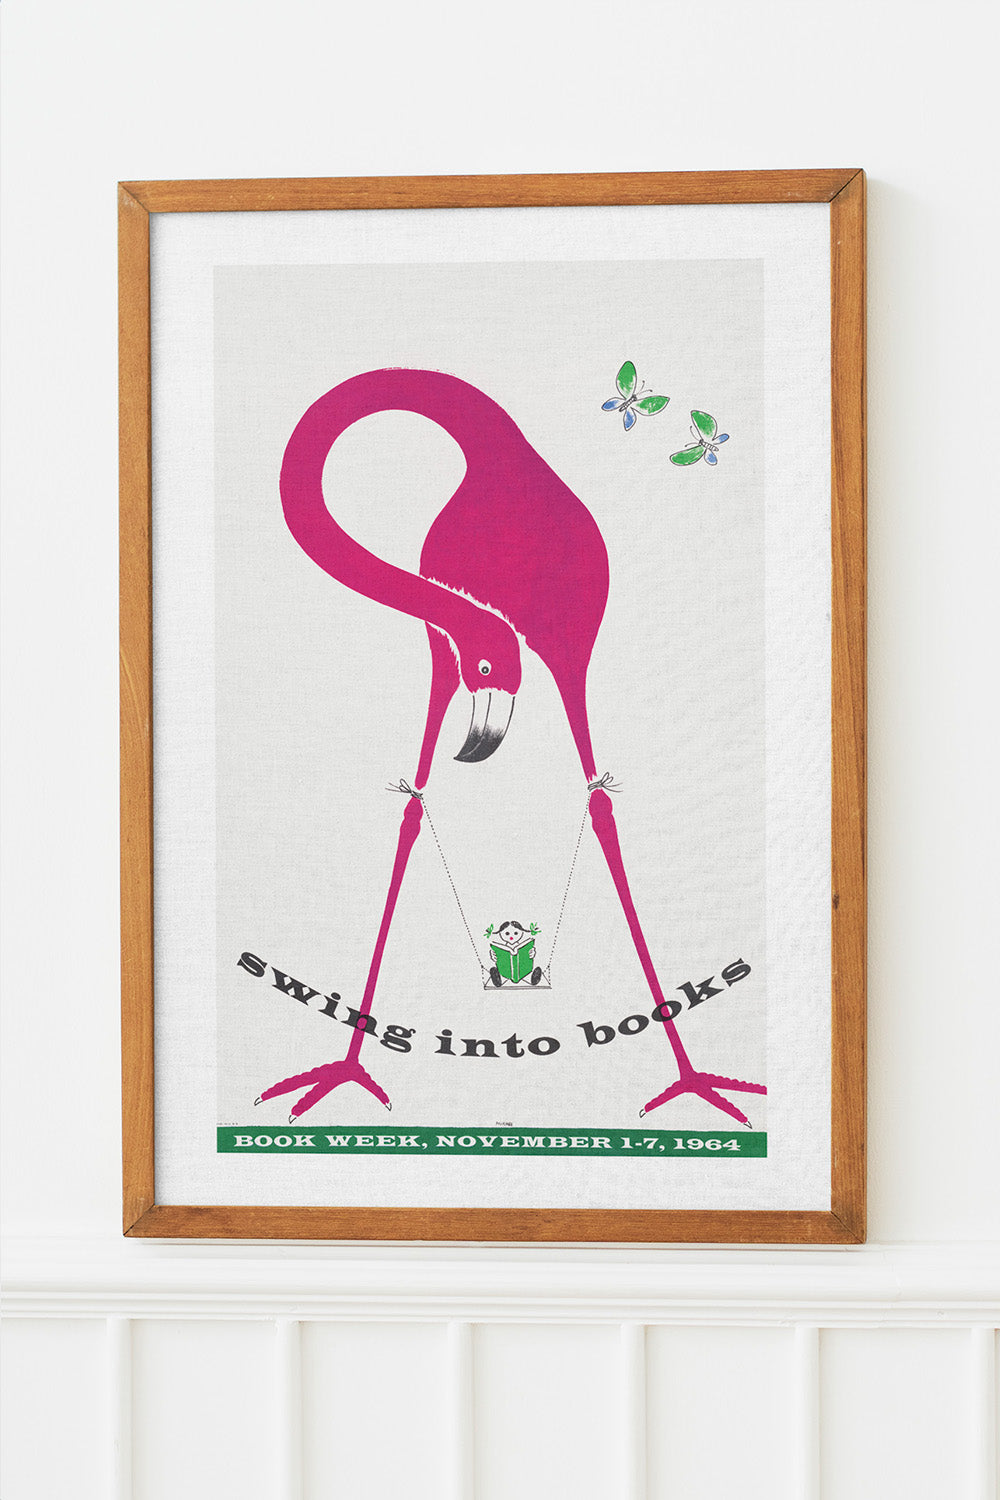 Vintage poster featuring a large pink flamingo with a child swinging between its legs, promoting a book fair.